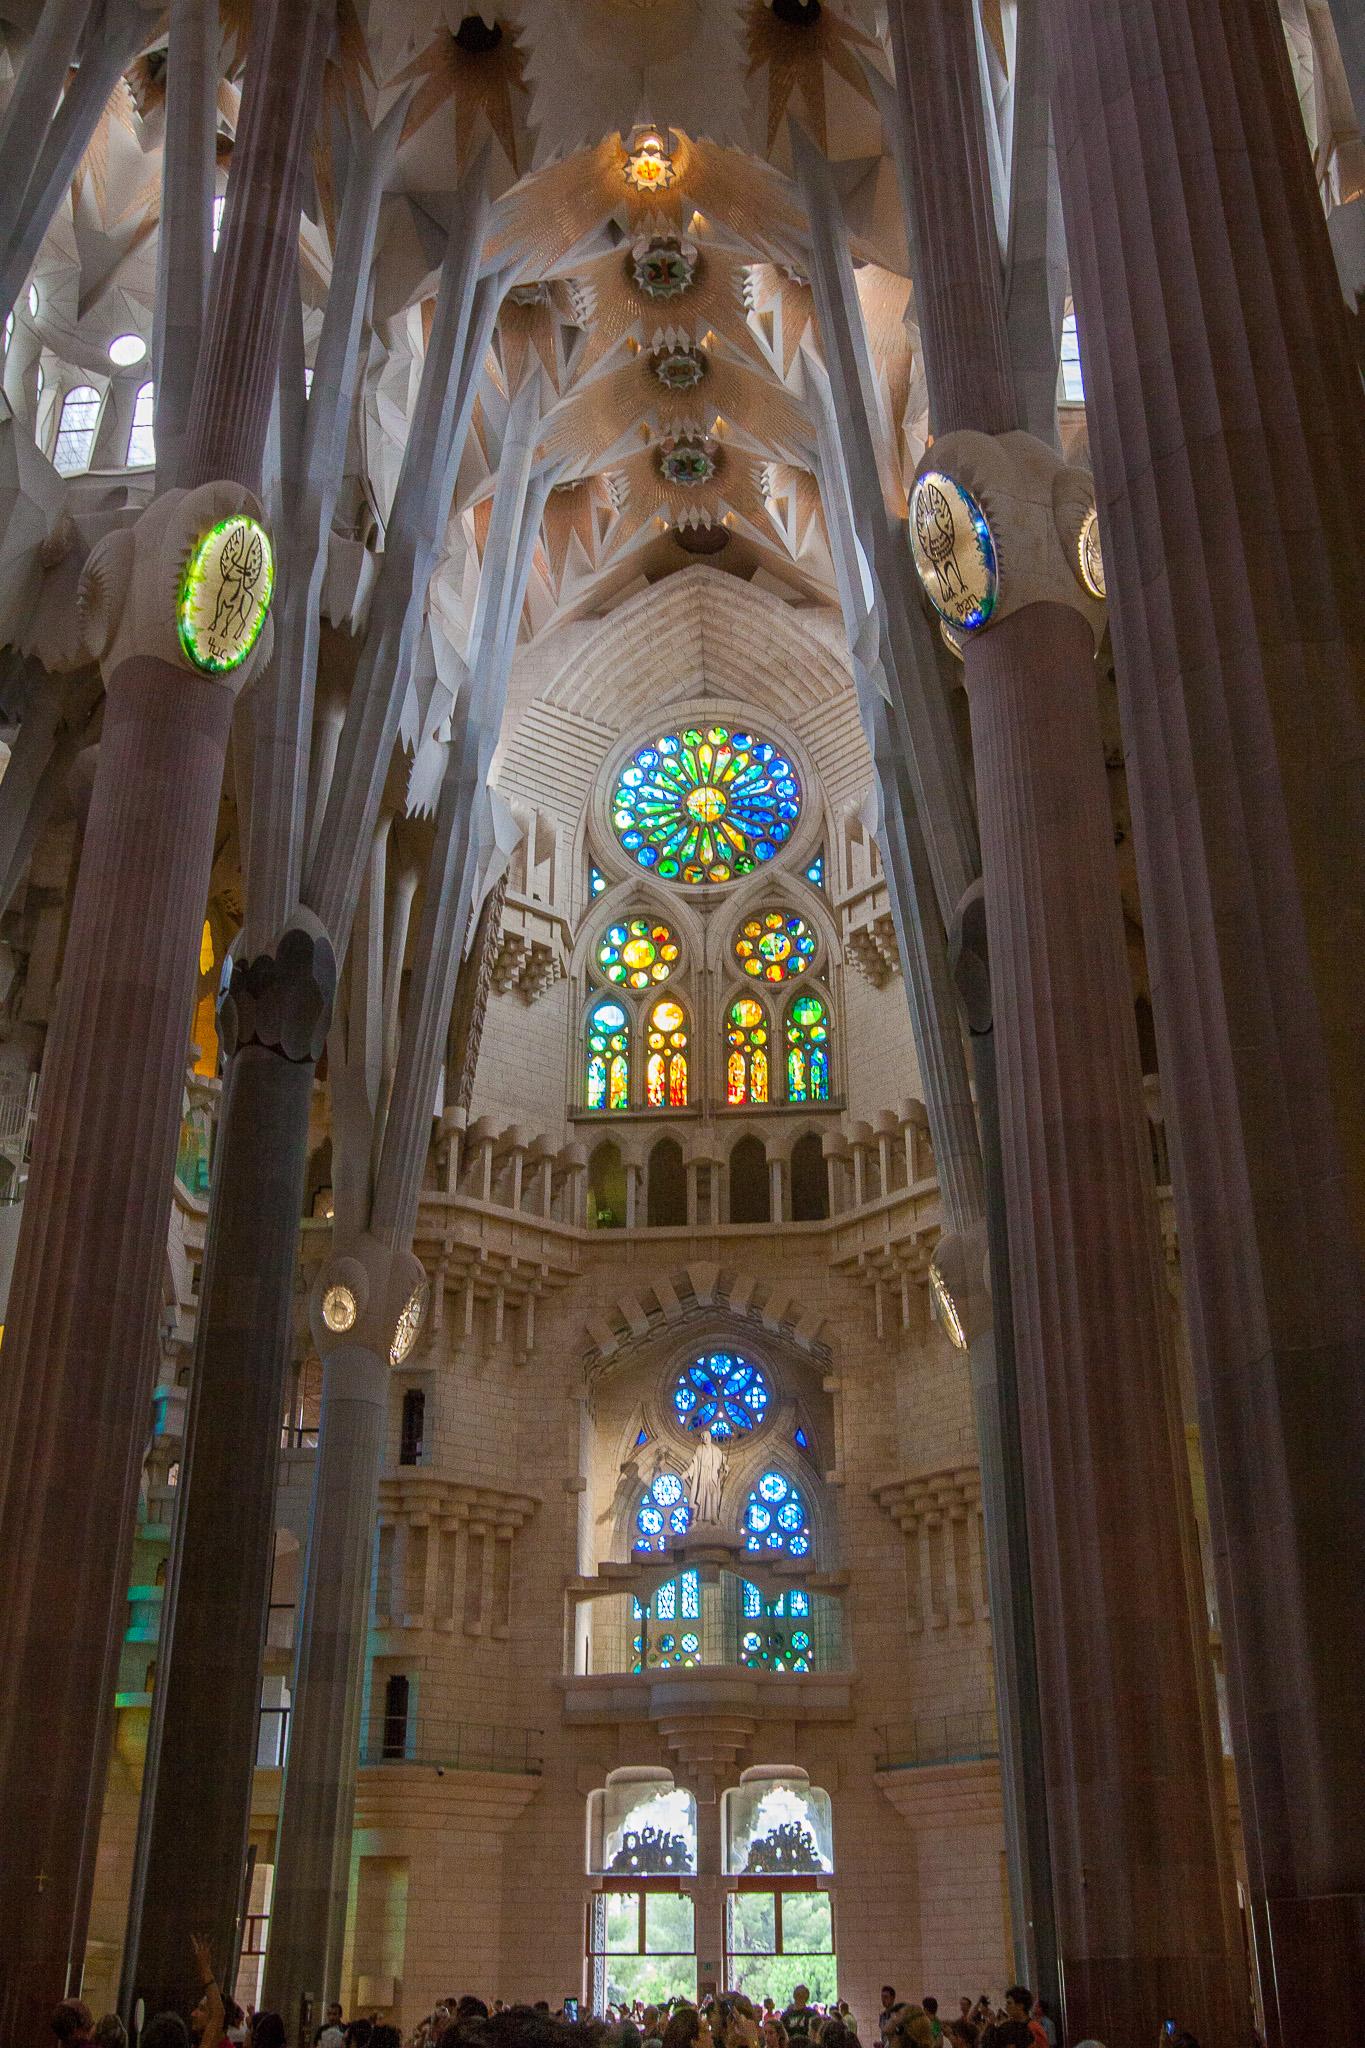 Barcelona, Spain is such a colorful city to explore! It’s the perfect place for a fun couple’s trip. Check out our top 6 activities during your 48 hours in the city. | www.eatworktravel.com The luxury, adventure travel couple!